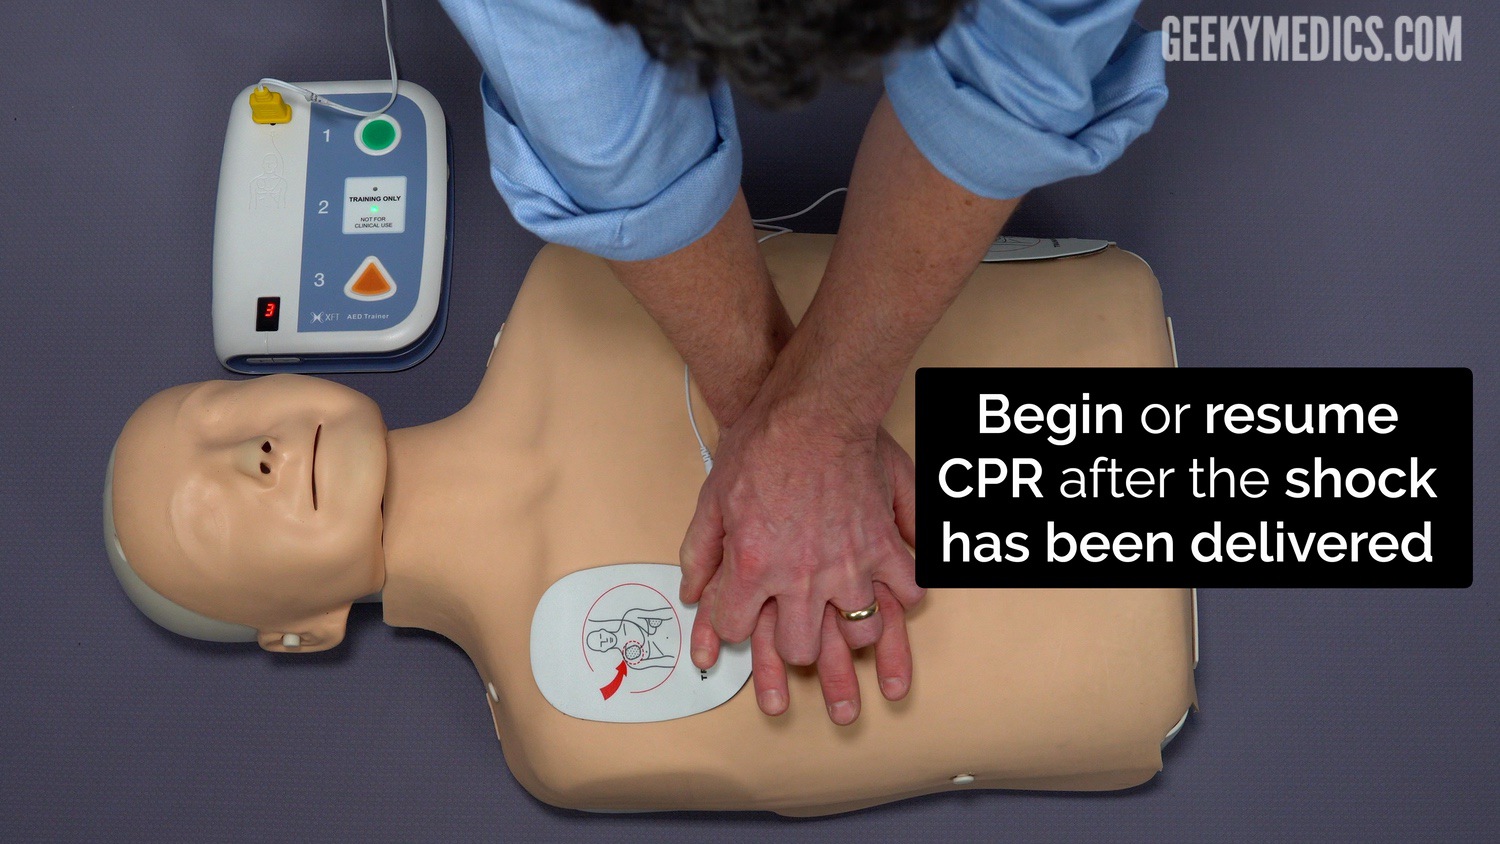 Re-start chest compressions after the shock is delivered